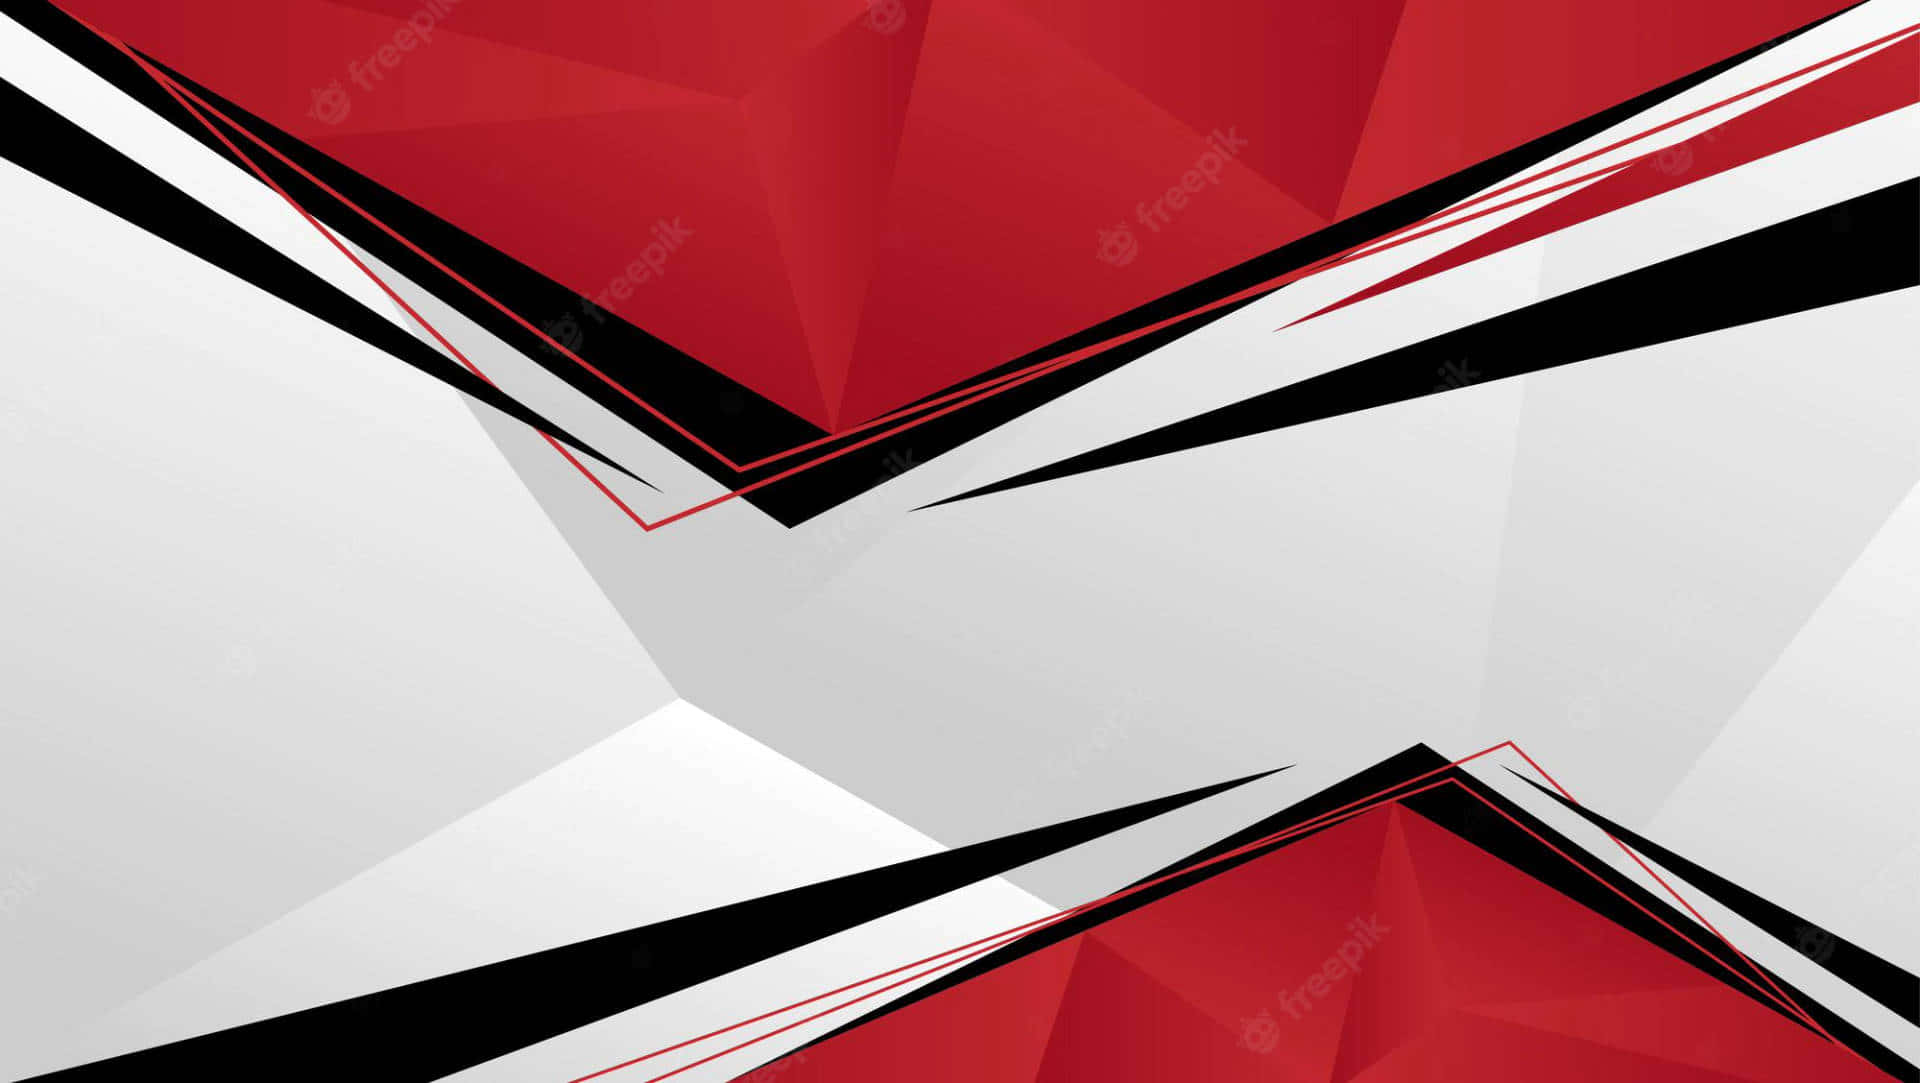 Bold and Colorful Red, White and Black Abstract Wallpaper